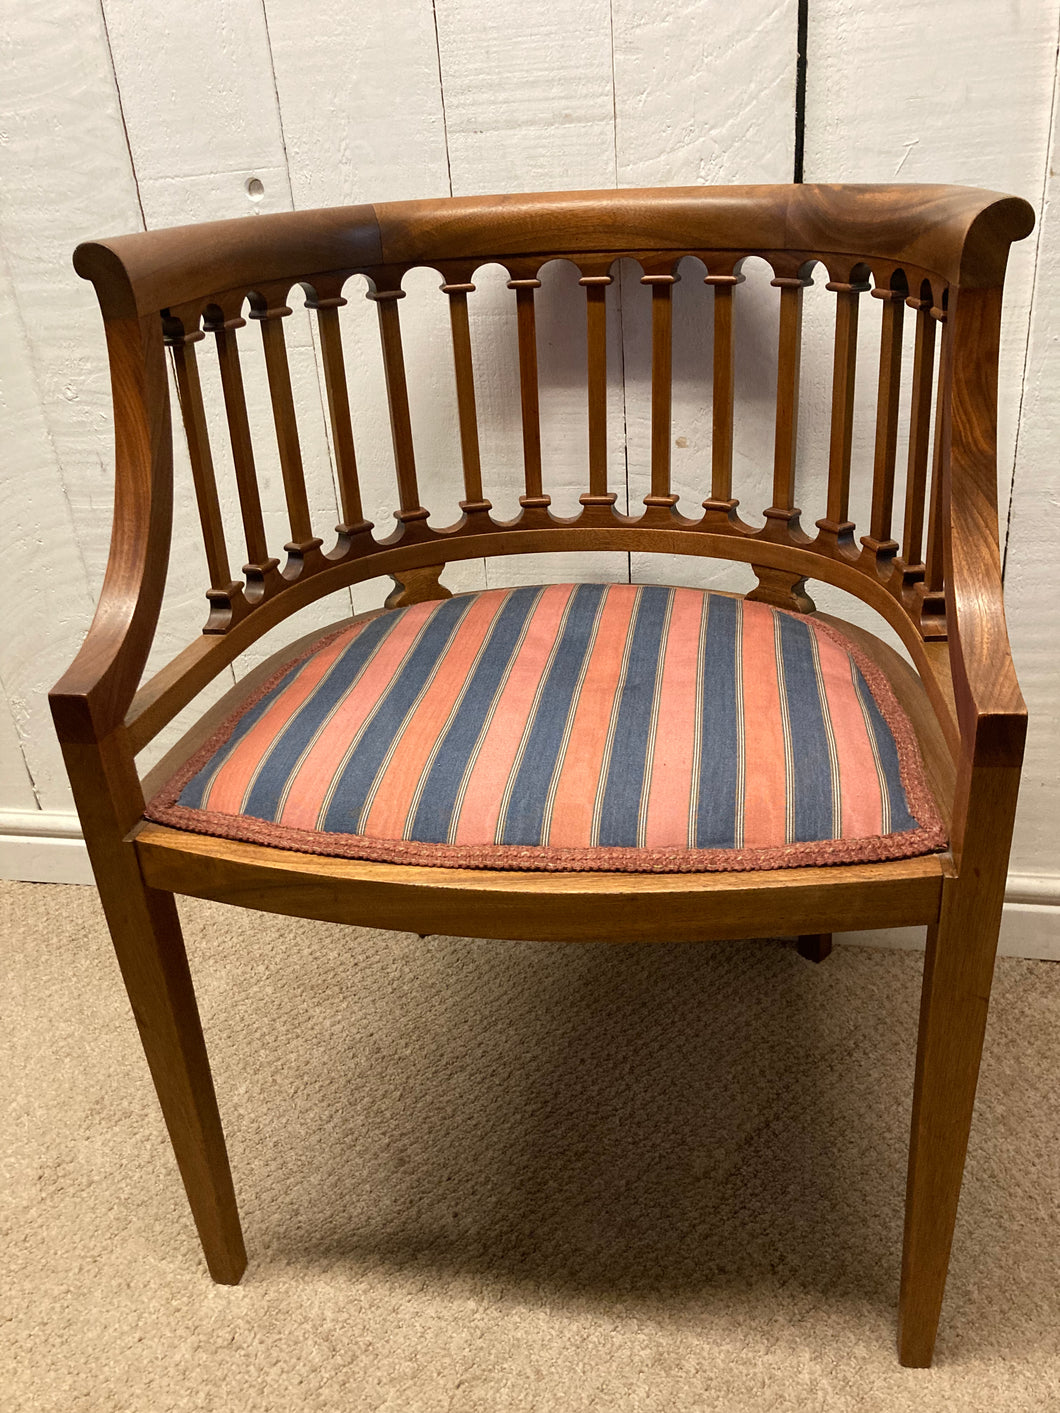 Hardwood Rounded Back Chair Seat Upholstered In Striped Material